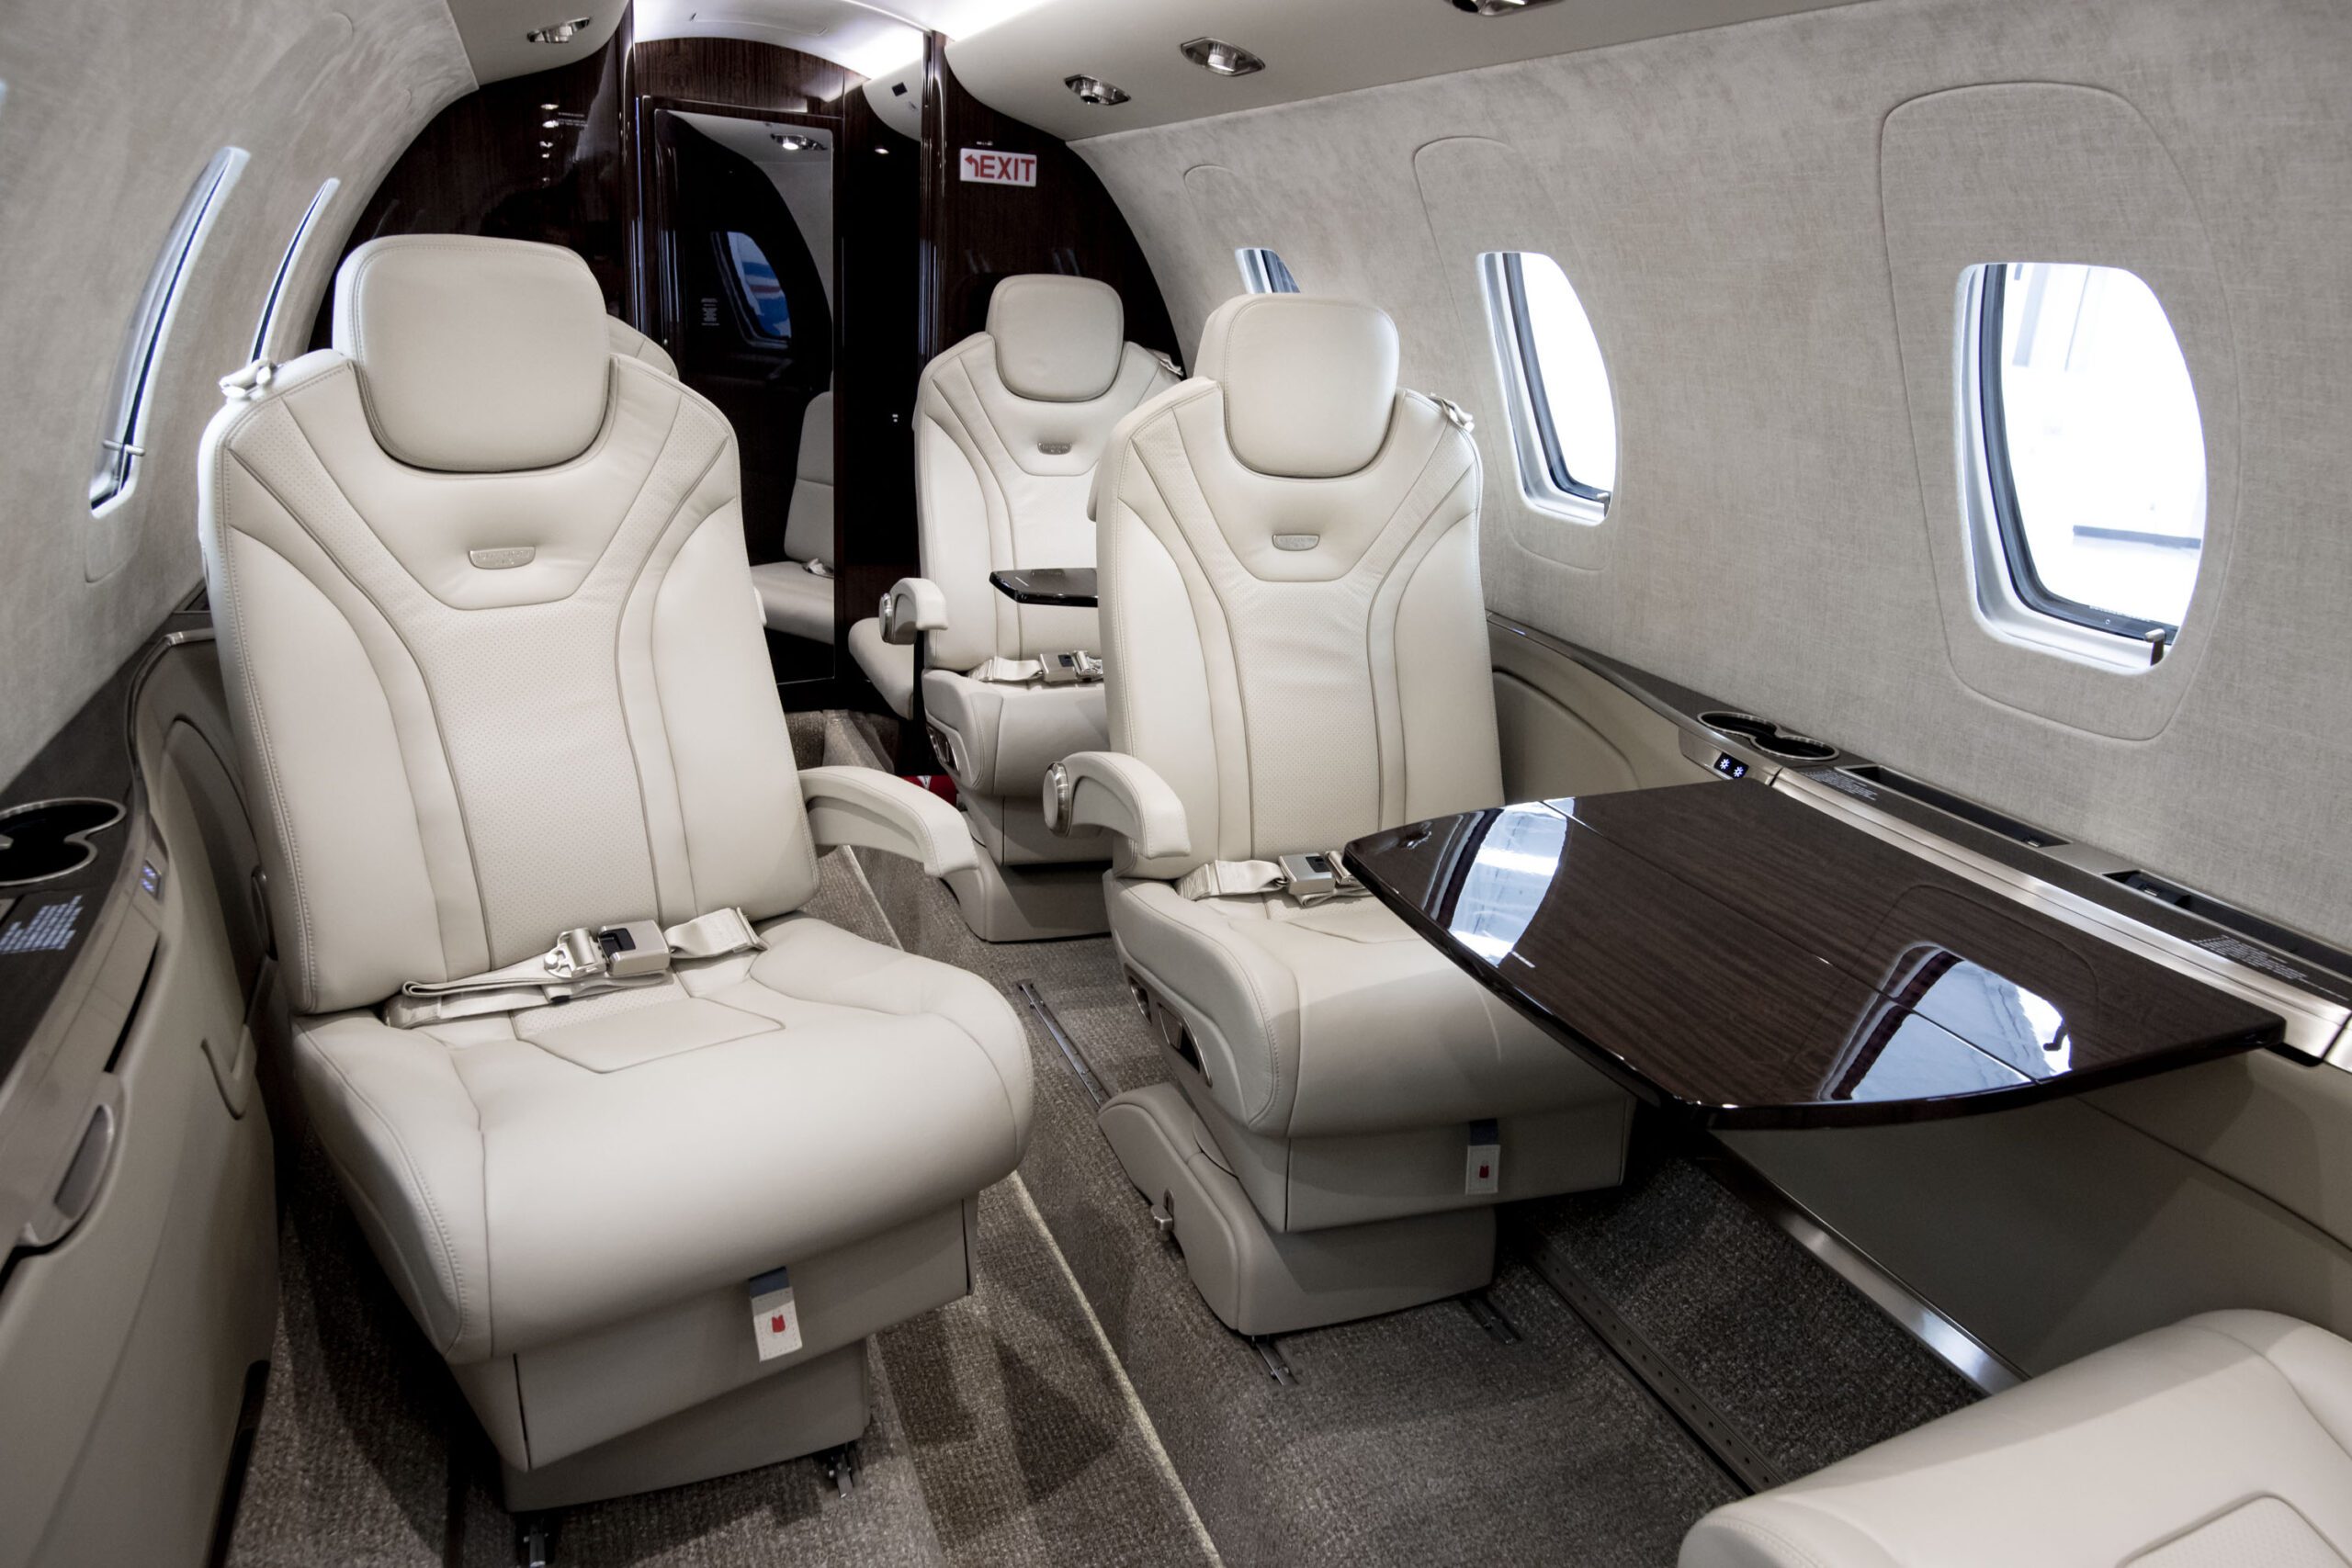 Luxurious white seats of Private plane